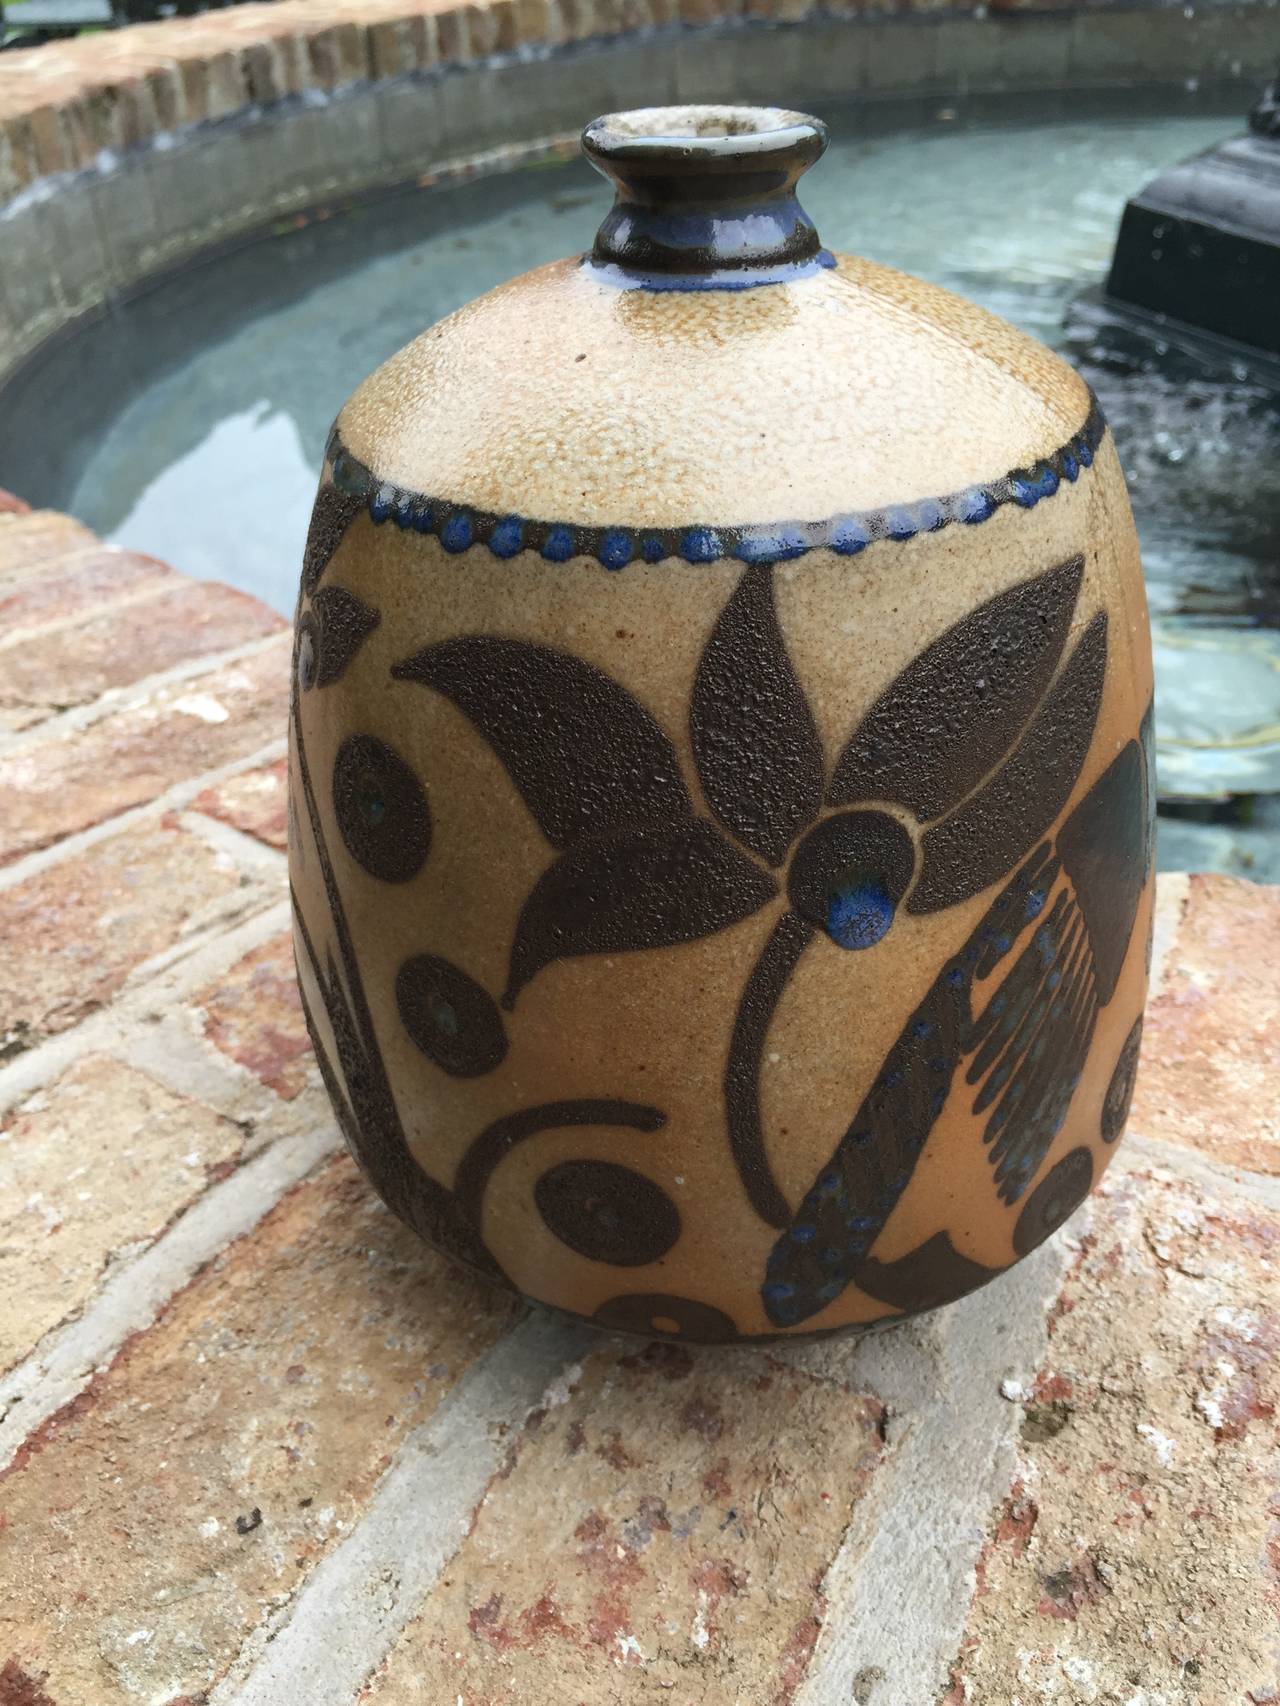 Glazed finish on this beautifully adorned ceramic vase in light brown and blue hues. Depicting birds and geometric shapes.